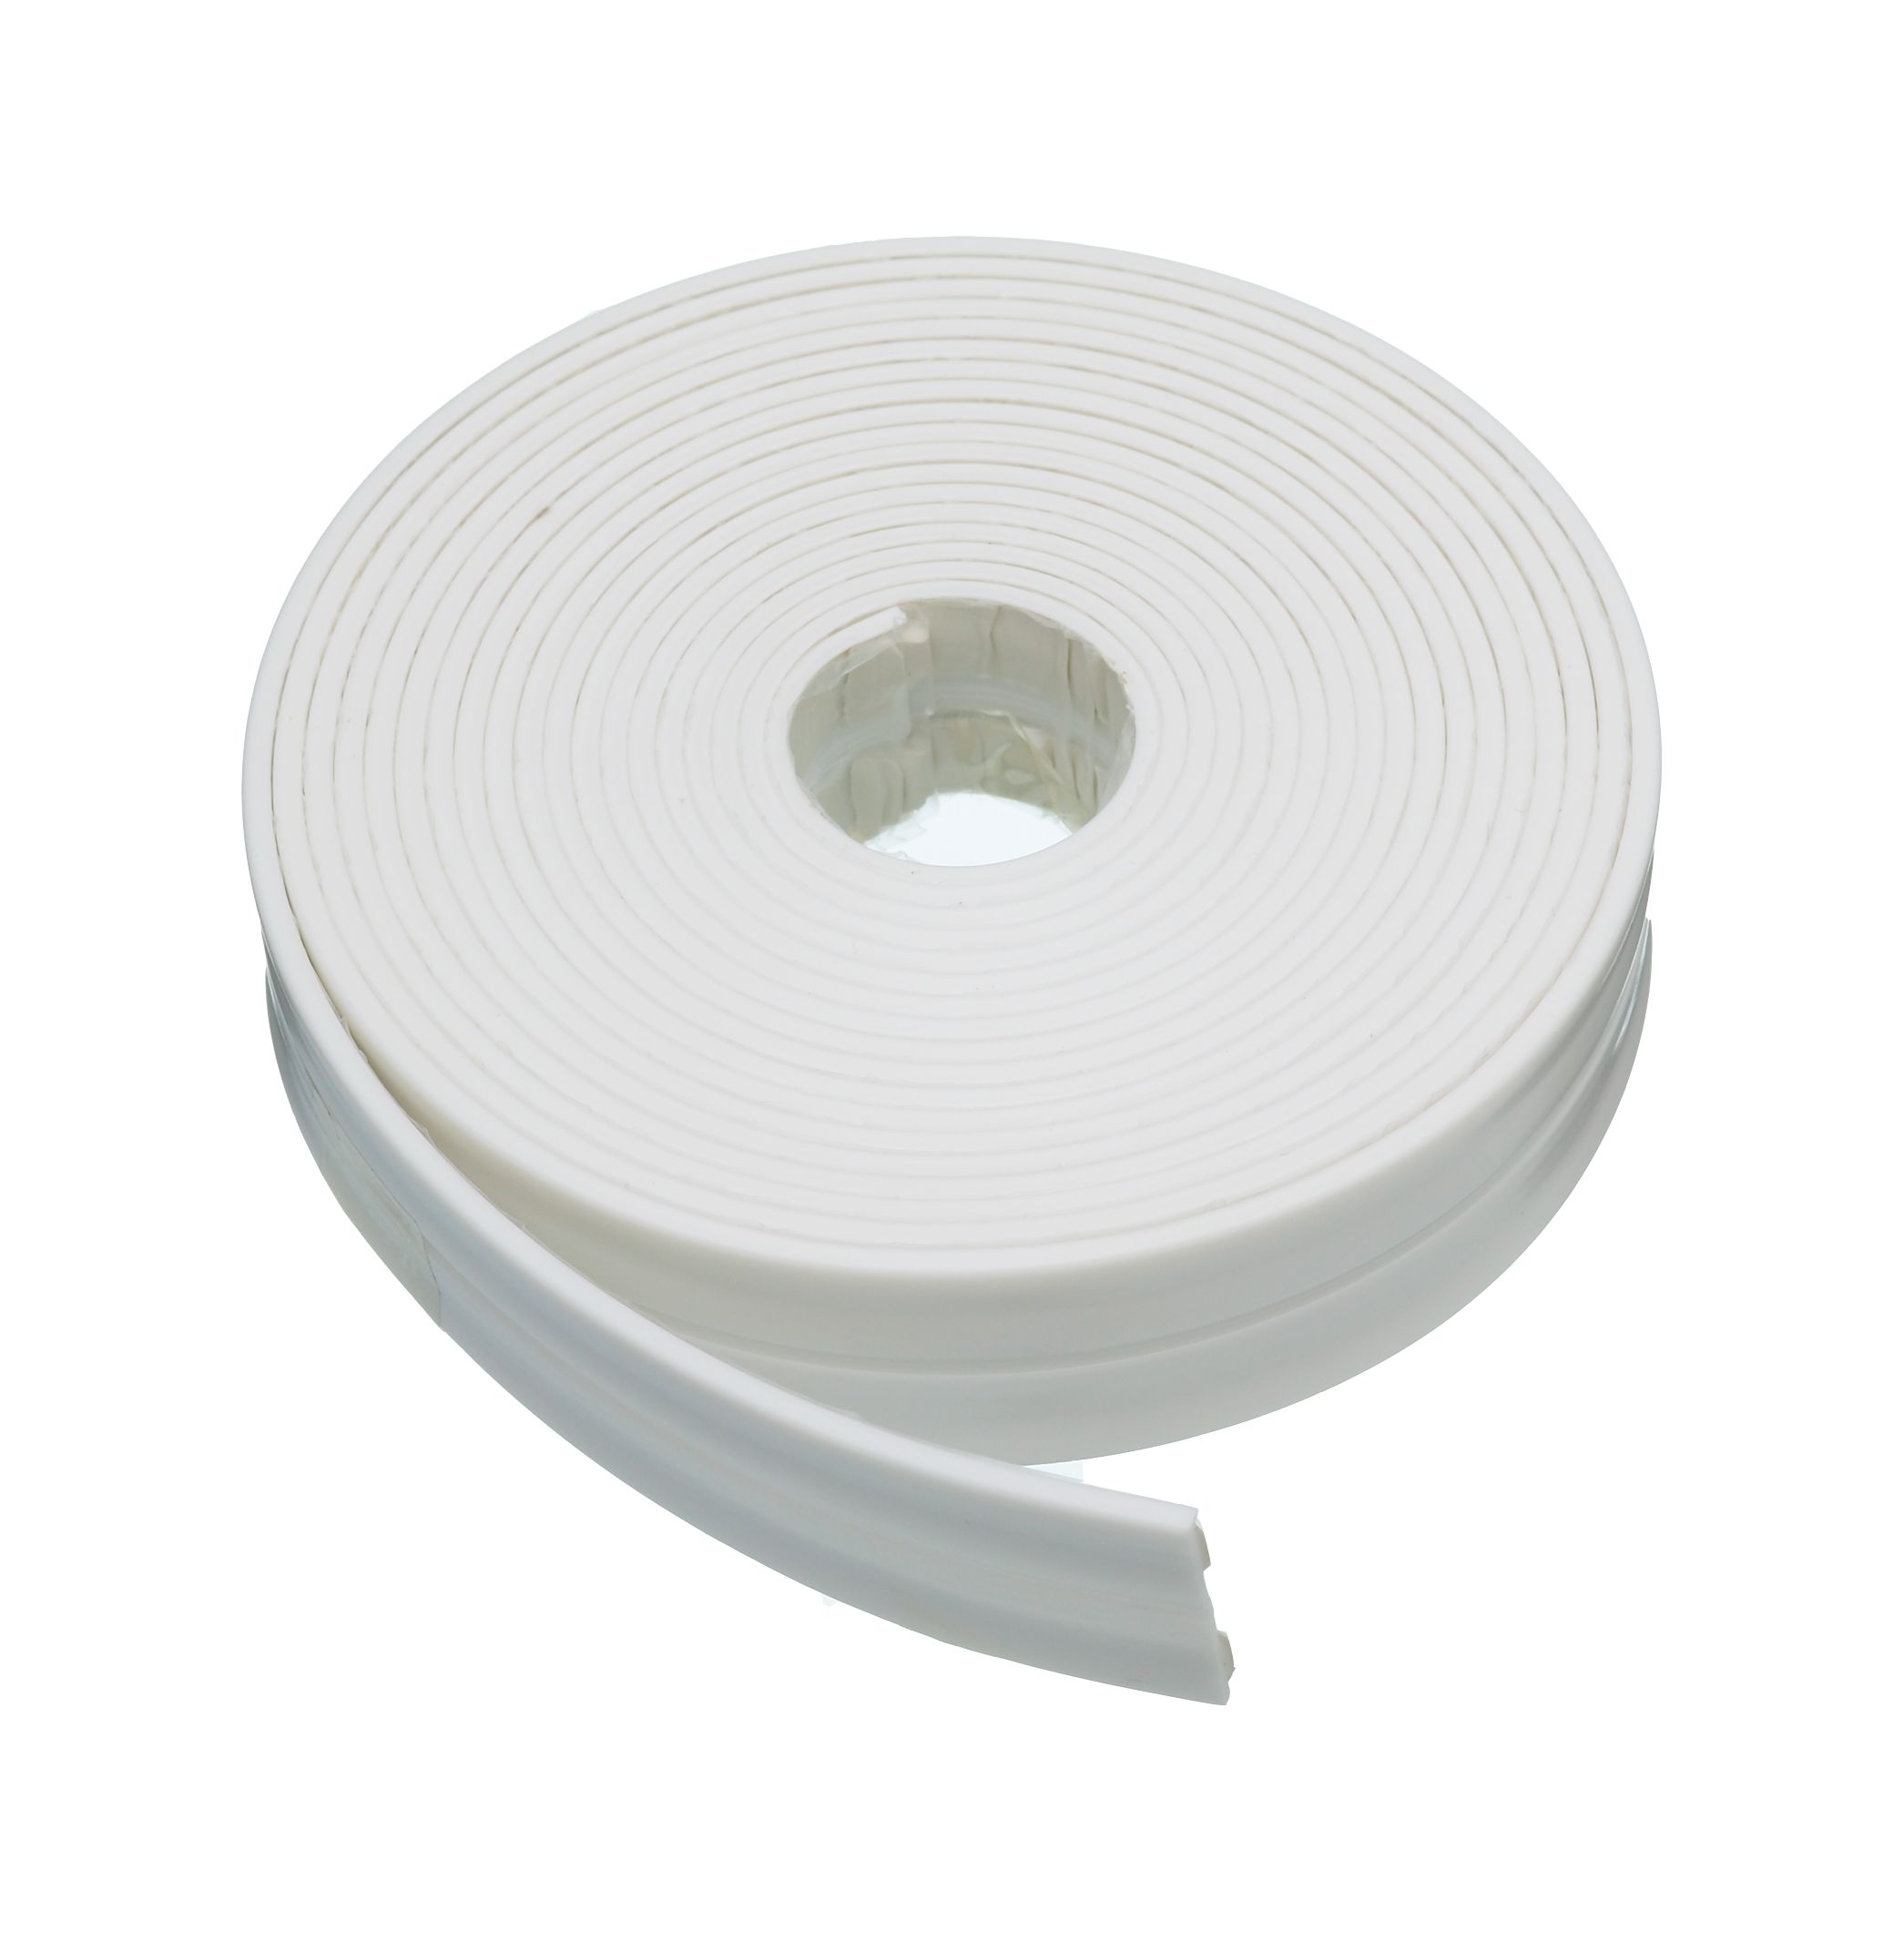 Image of Homelux Bath Seal White Flexible 3.5m